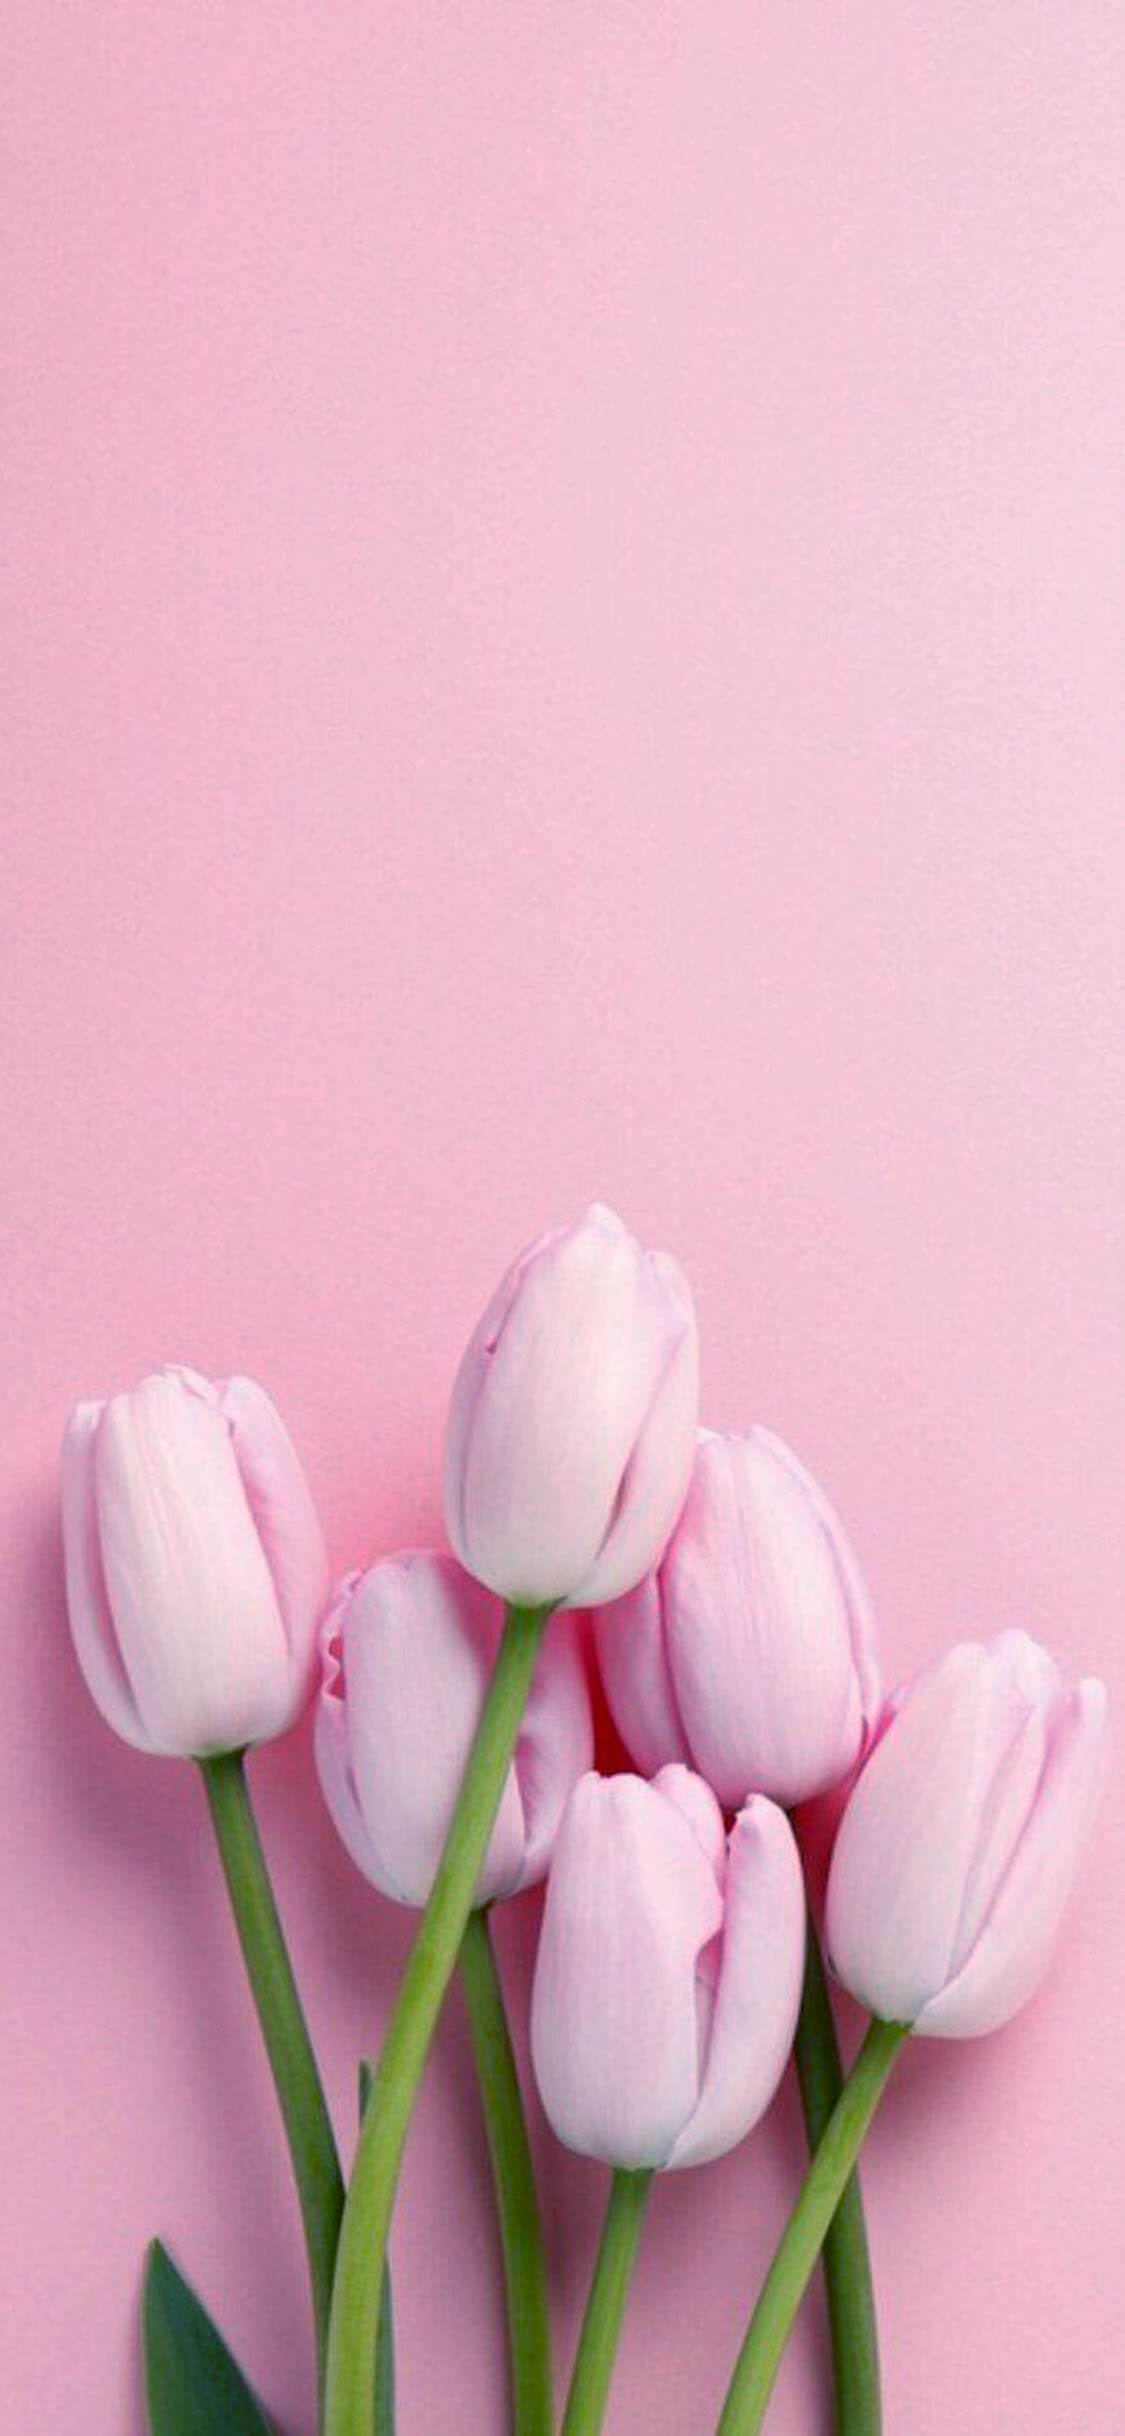 Iphone X Flowers Wallpapers